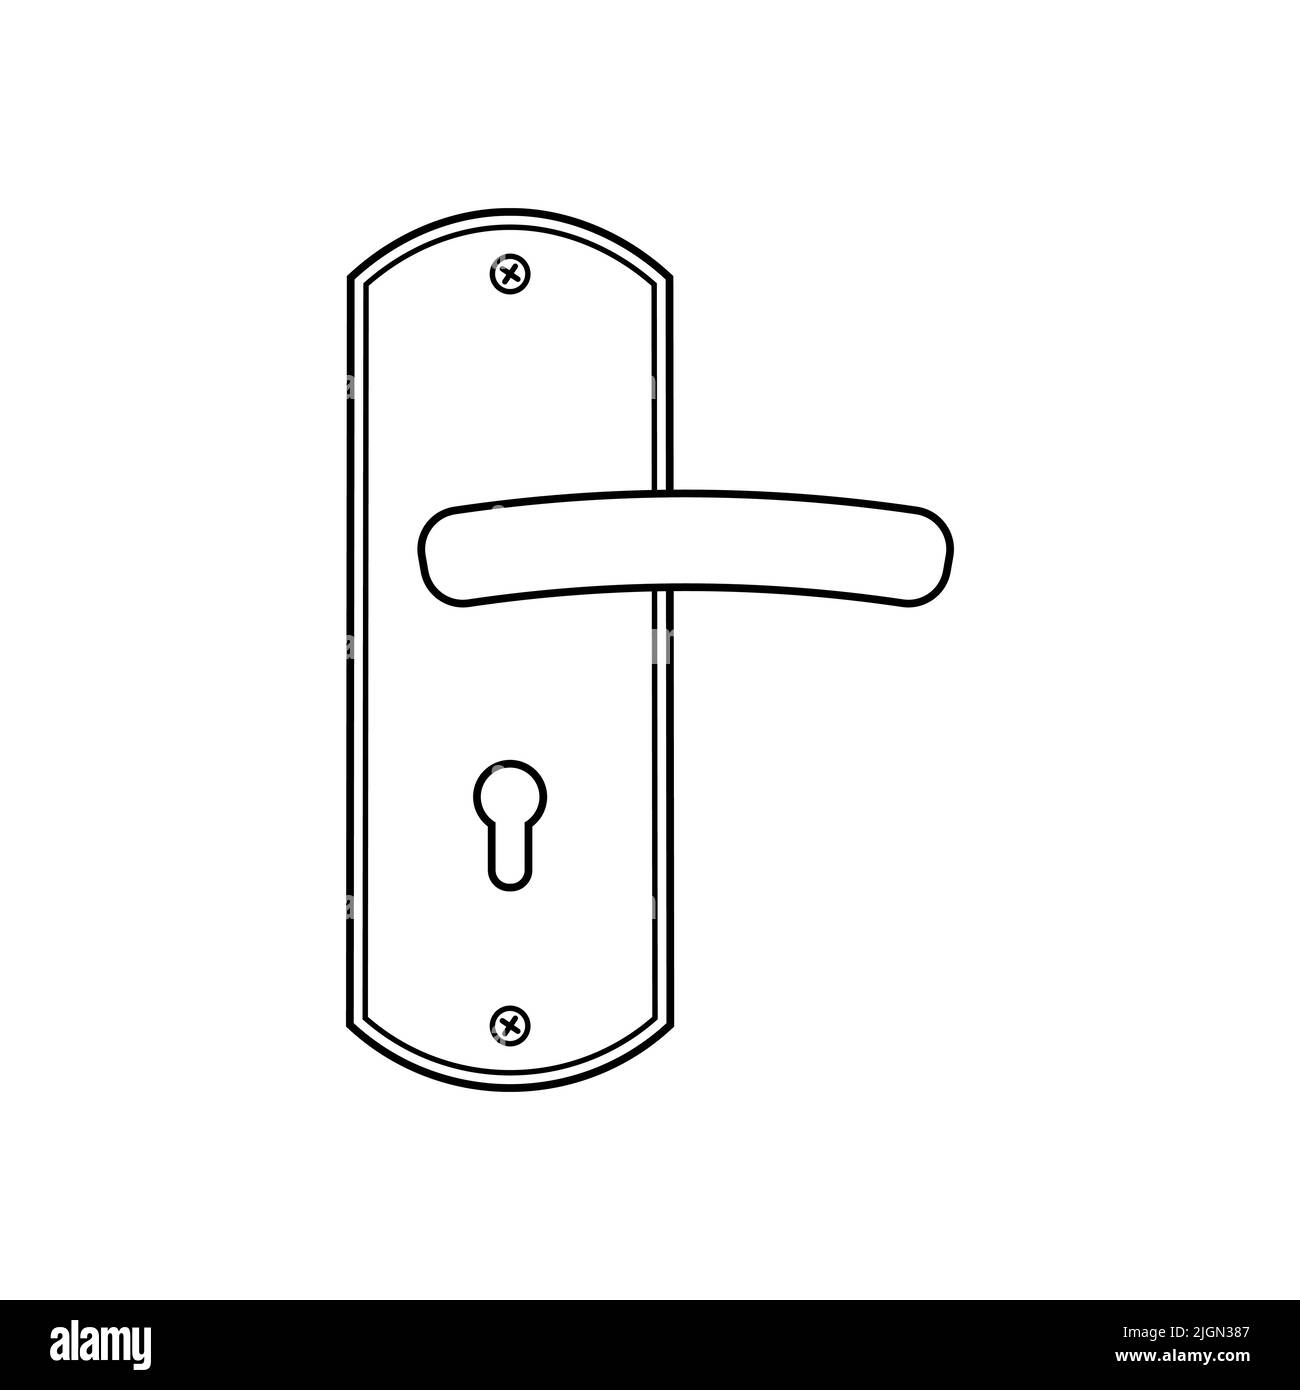 Door handle icon isolated on white background. Vector illustration Stock Vector